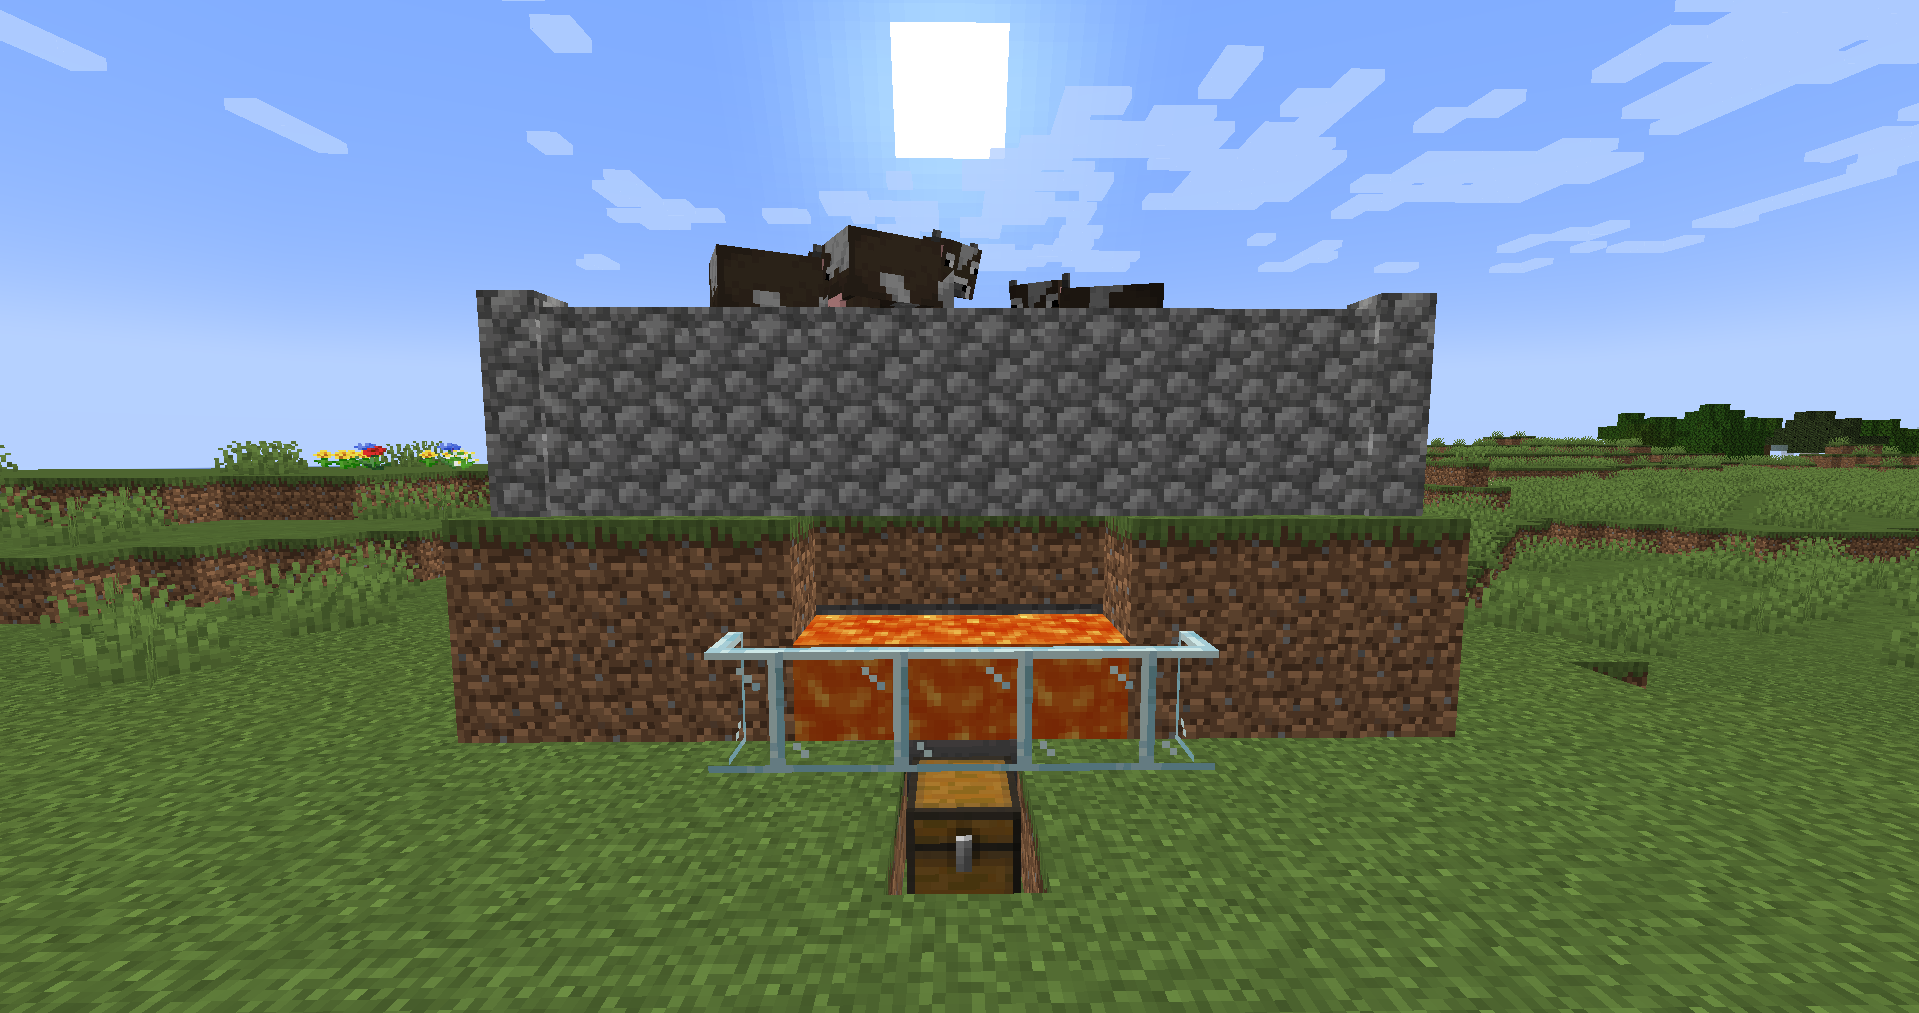 Automated Animal Farming in Minecraft